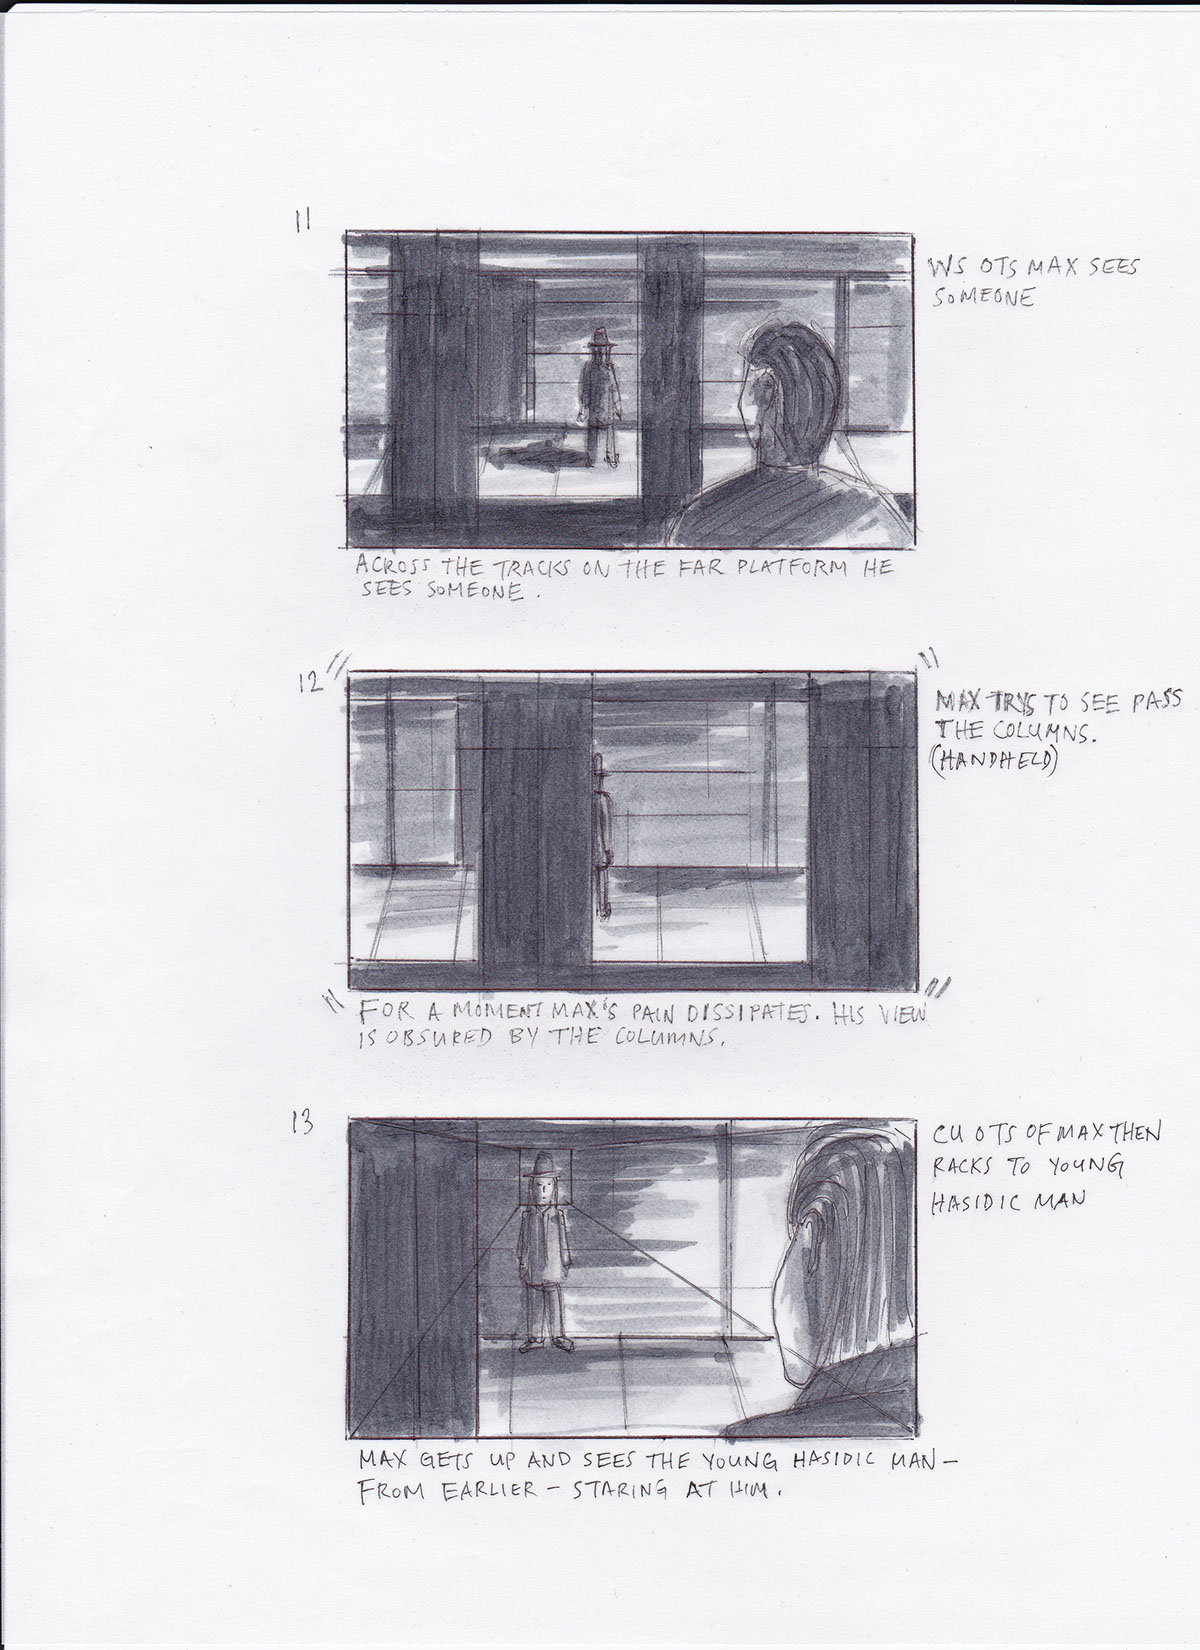 Storyboards sketches drawings illustrations photoshop